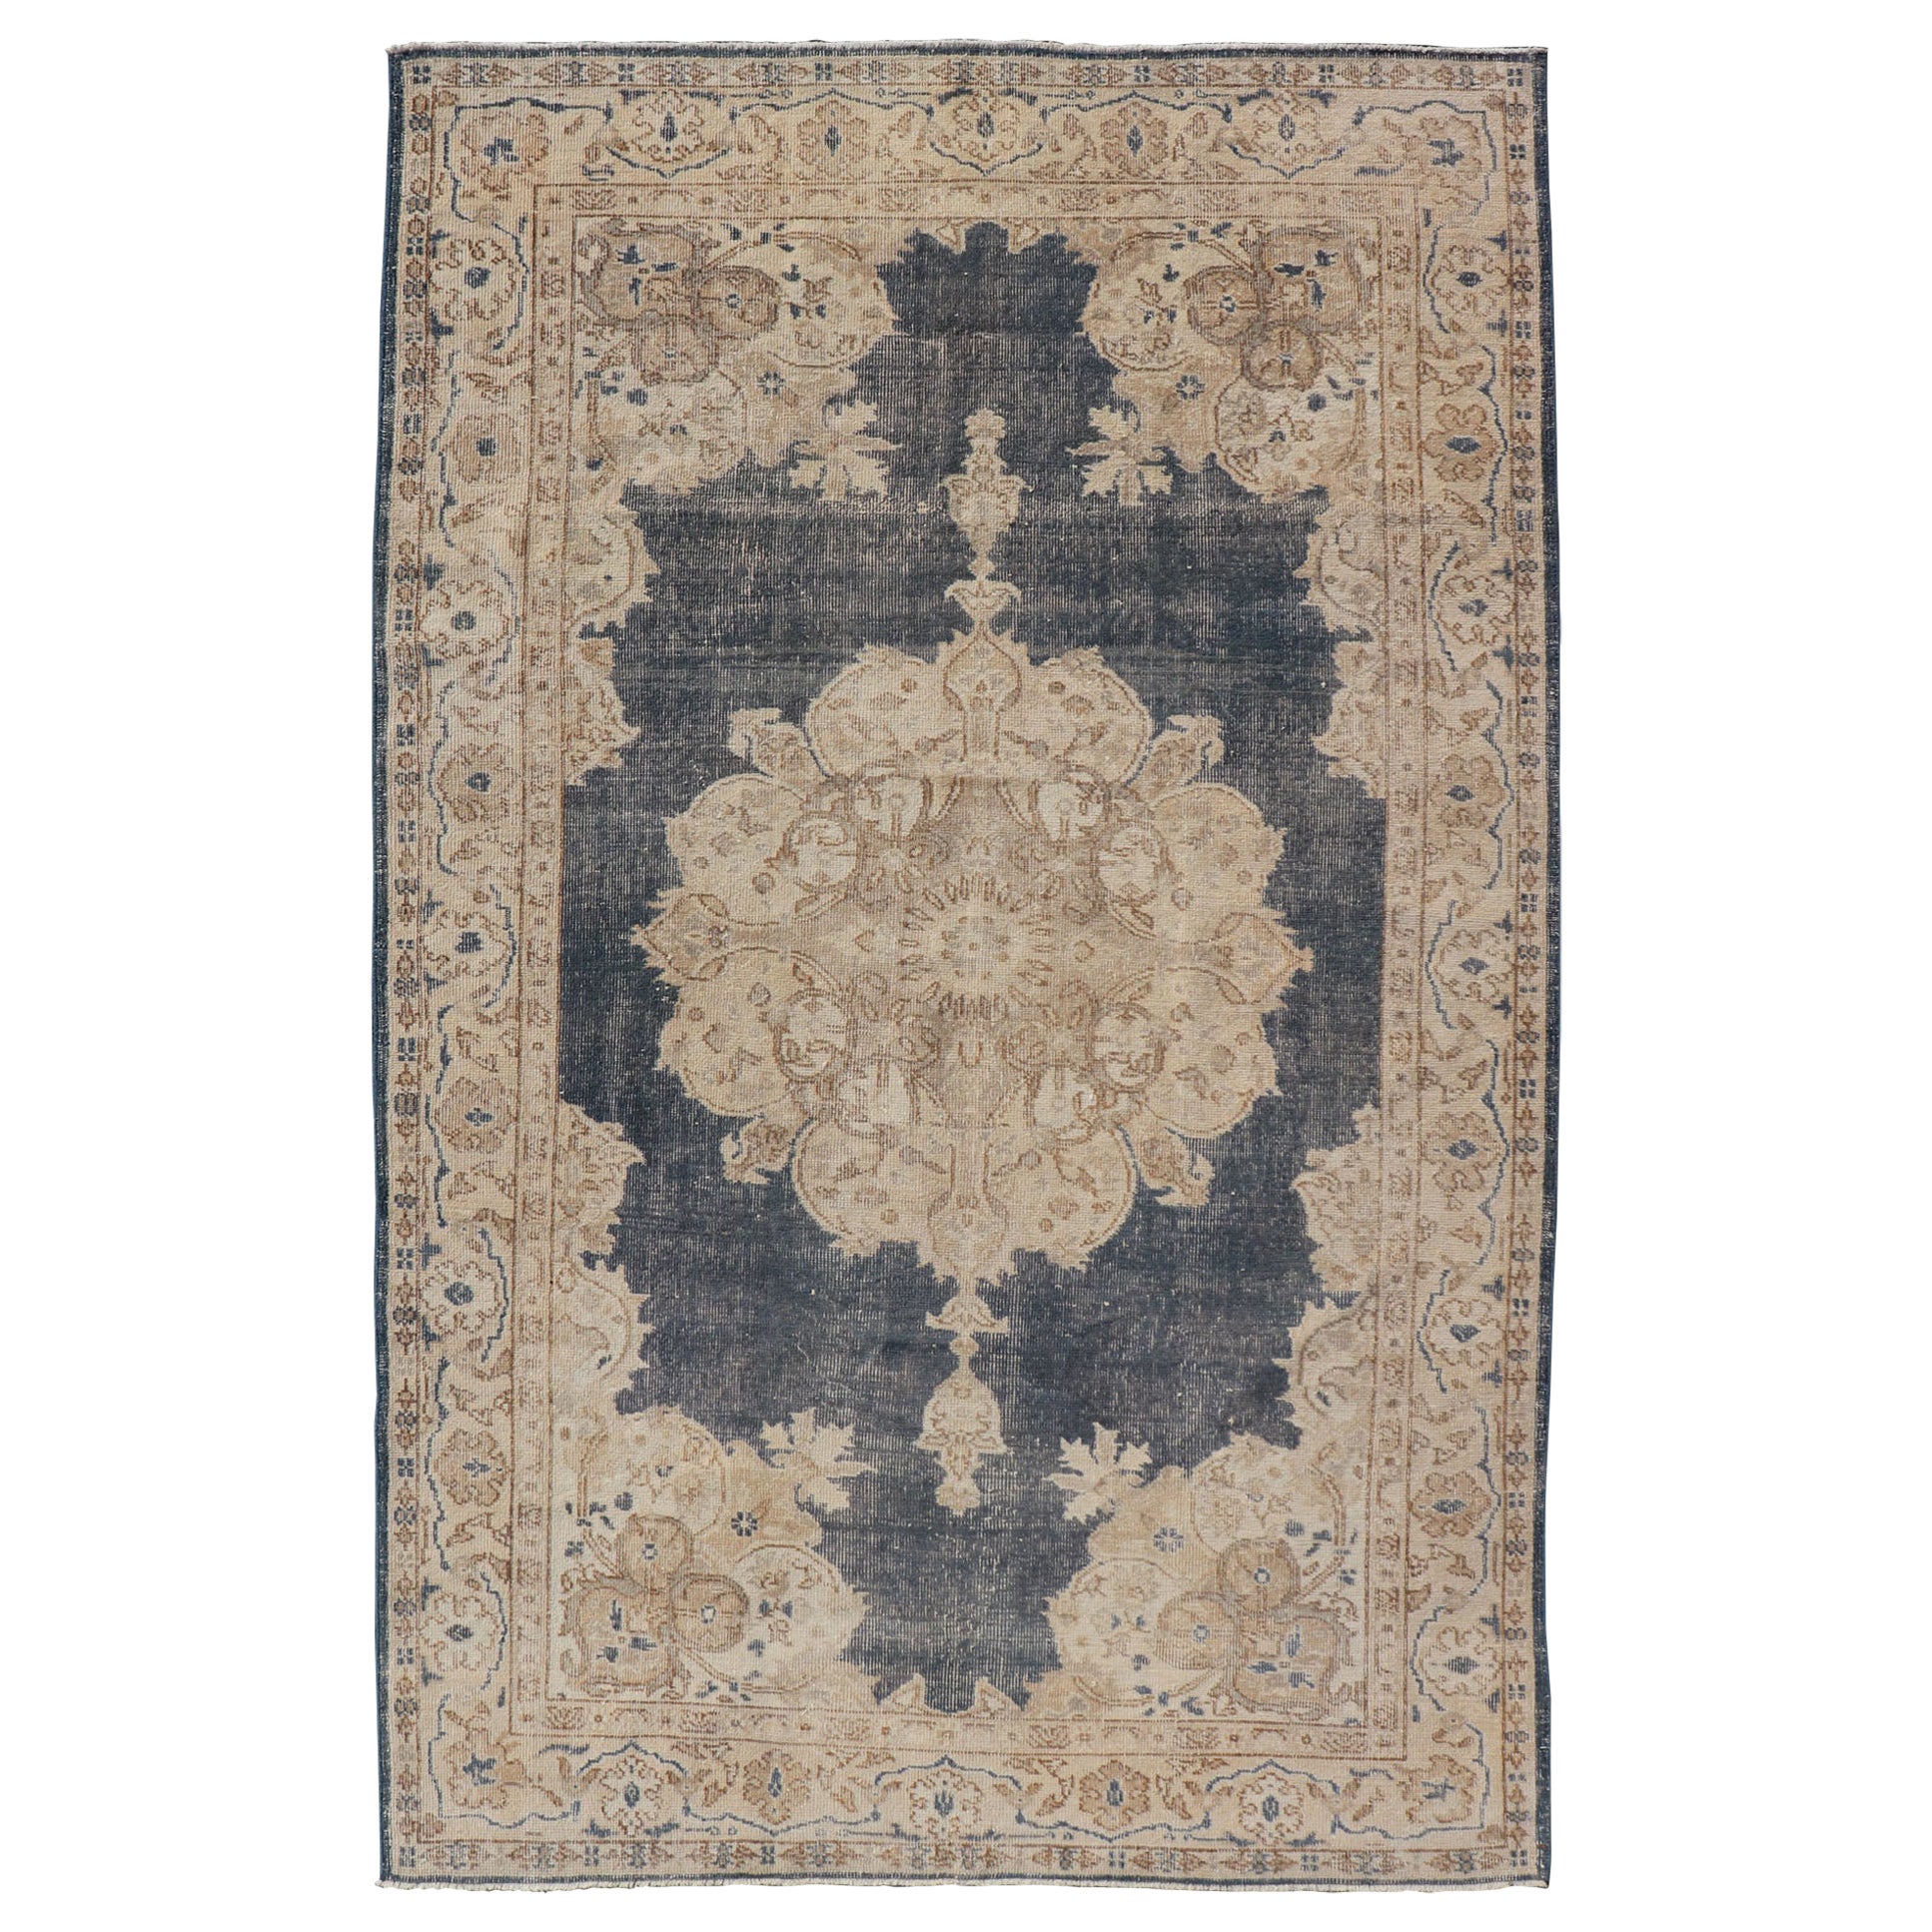 Distressed Turkish Carpet with Floral Design in Blue, Tan, Taupe, and Cream